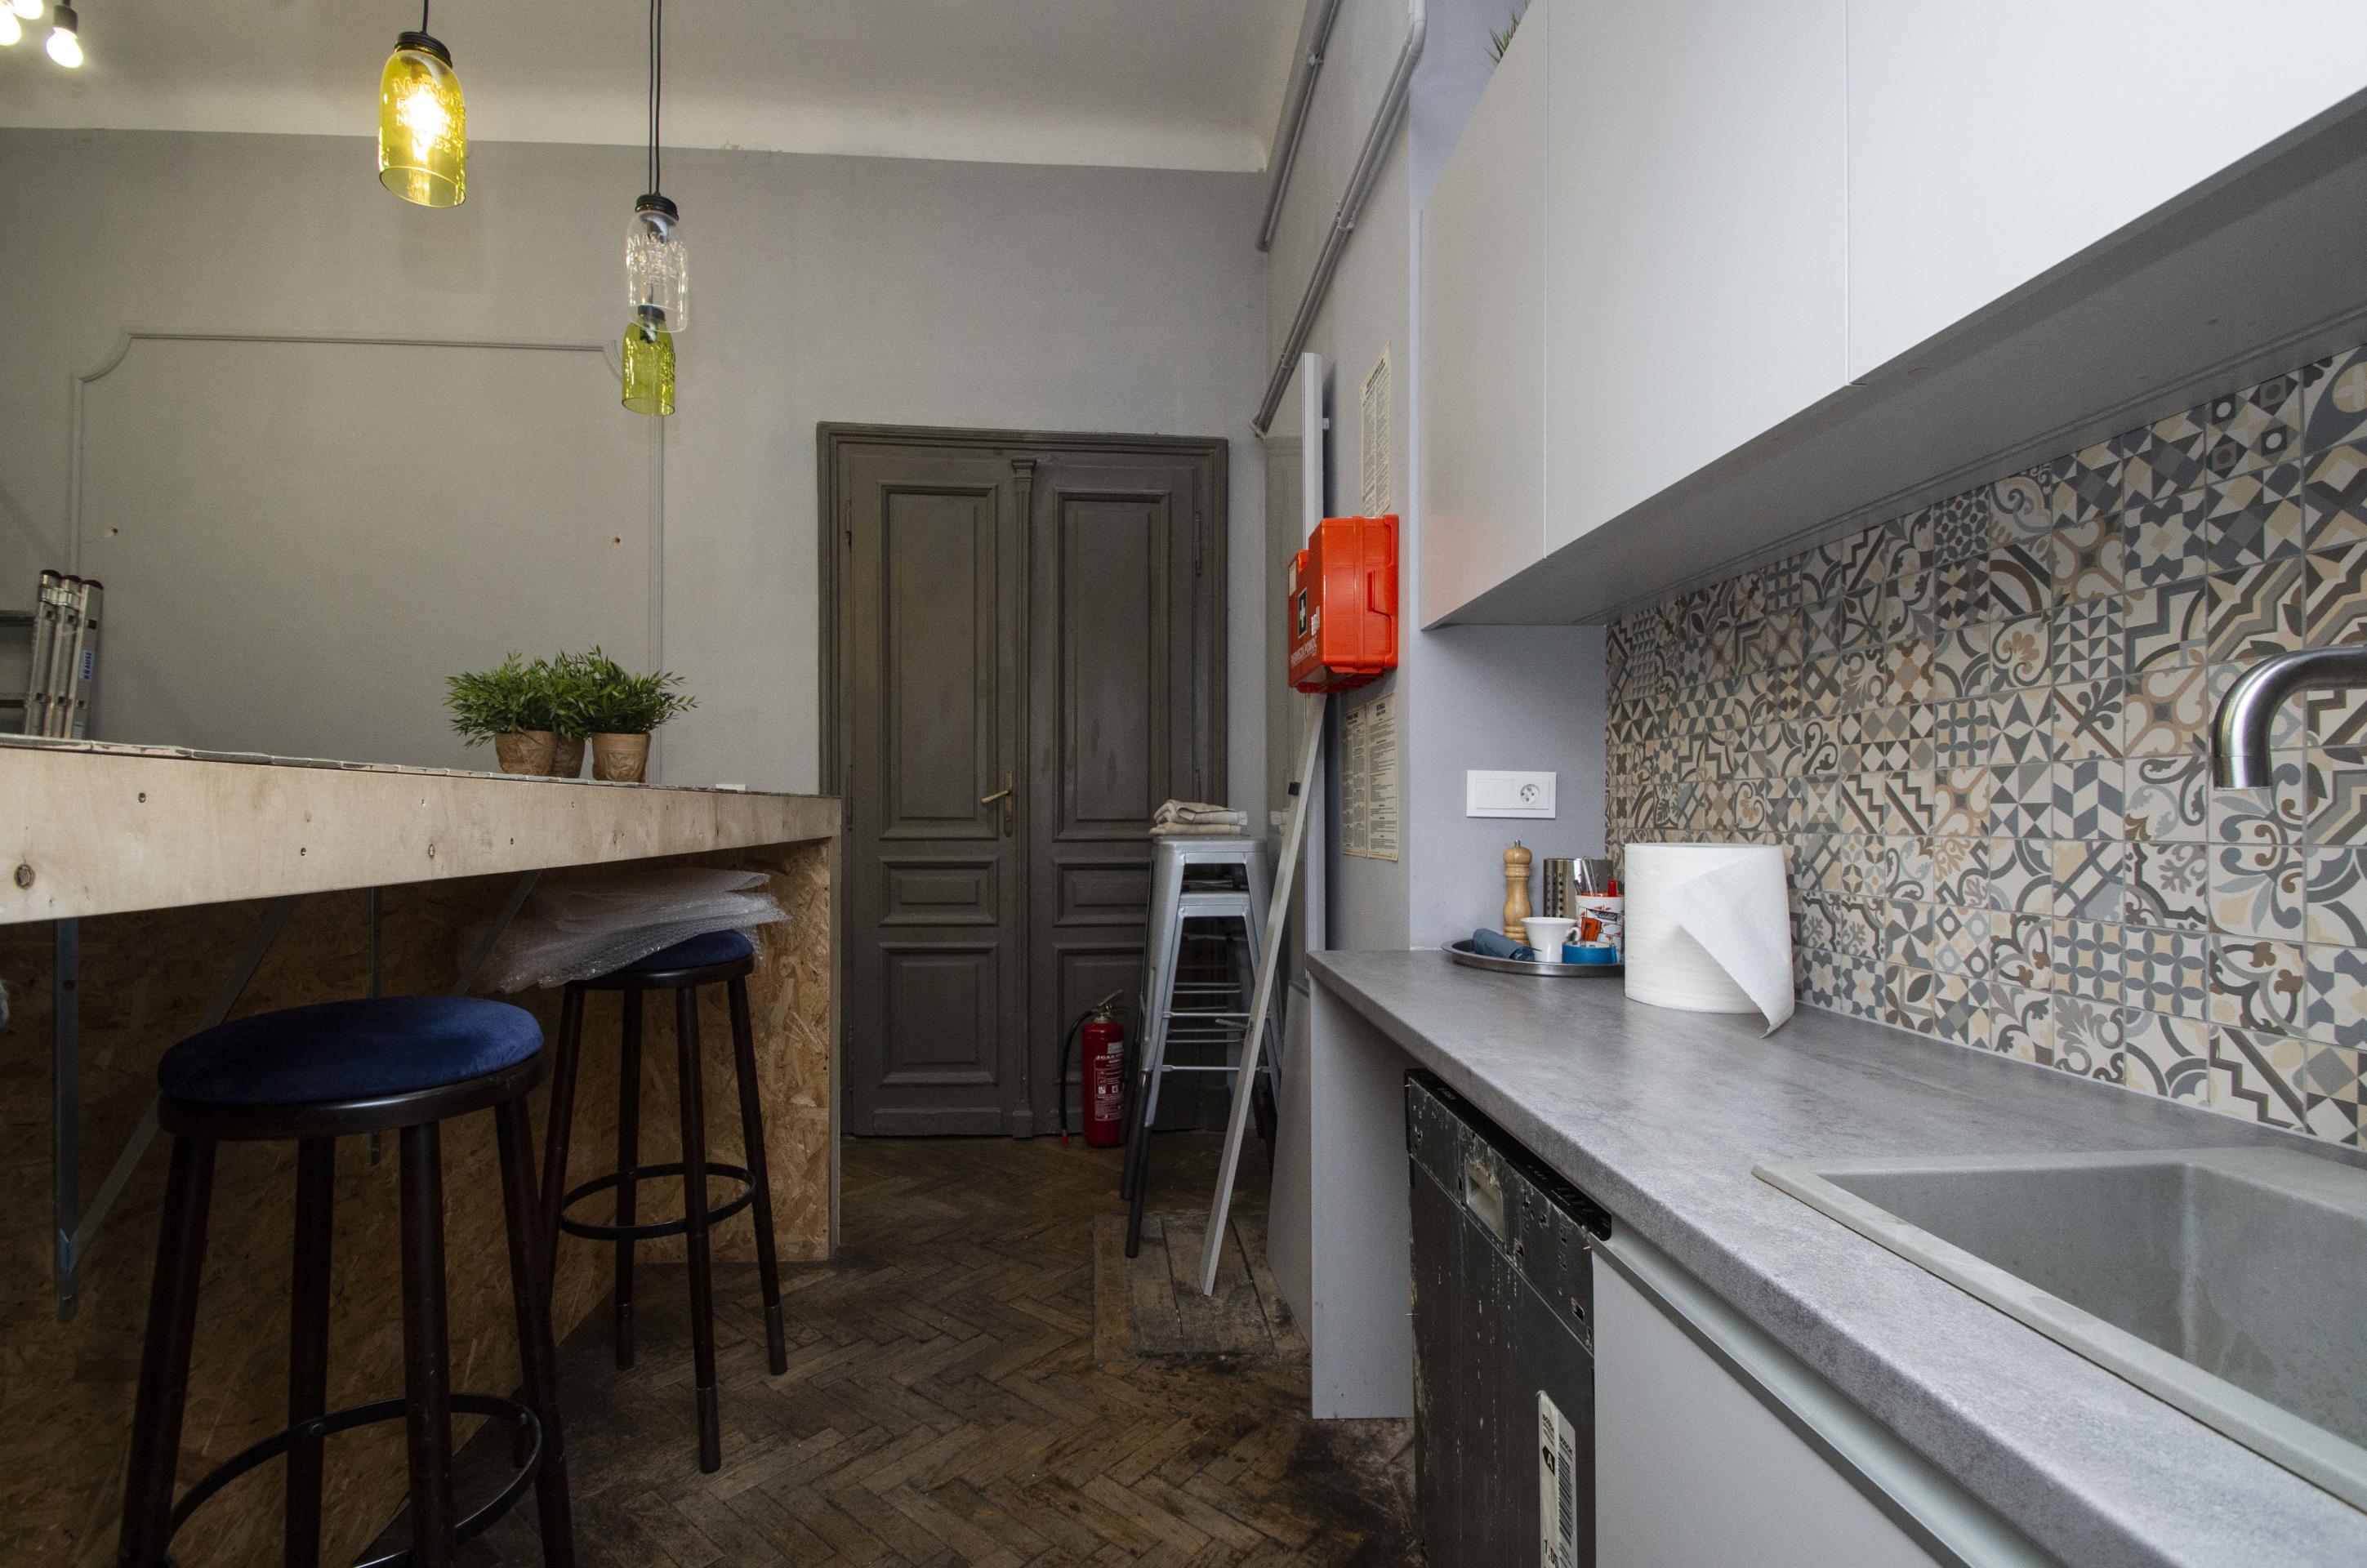 Office space in a beautiful tenement house on ul. Studencka